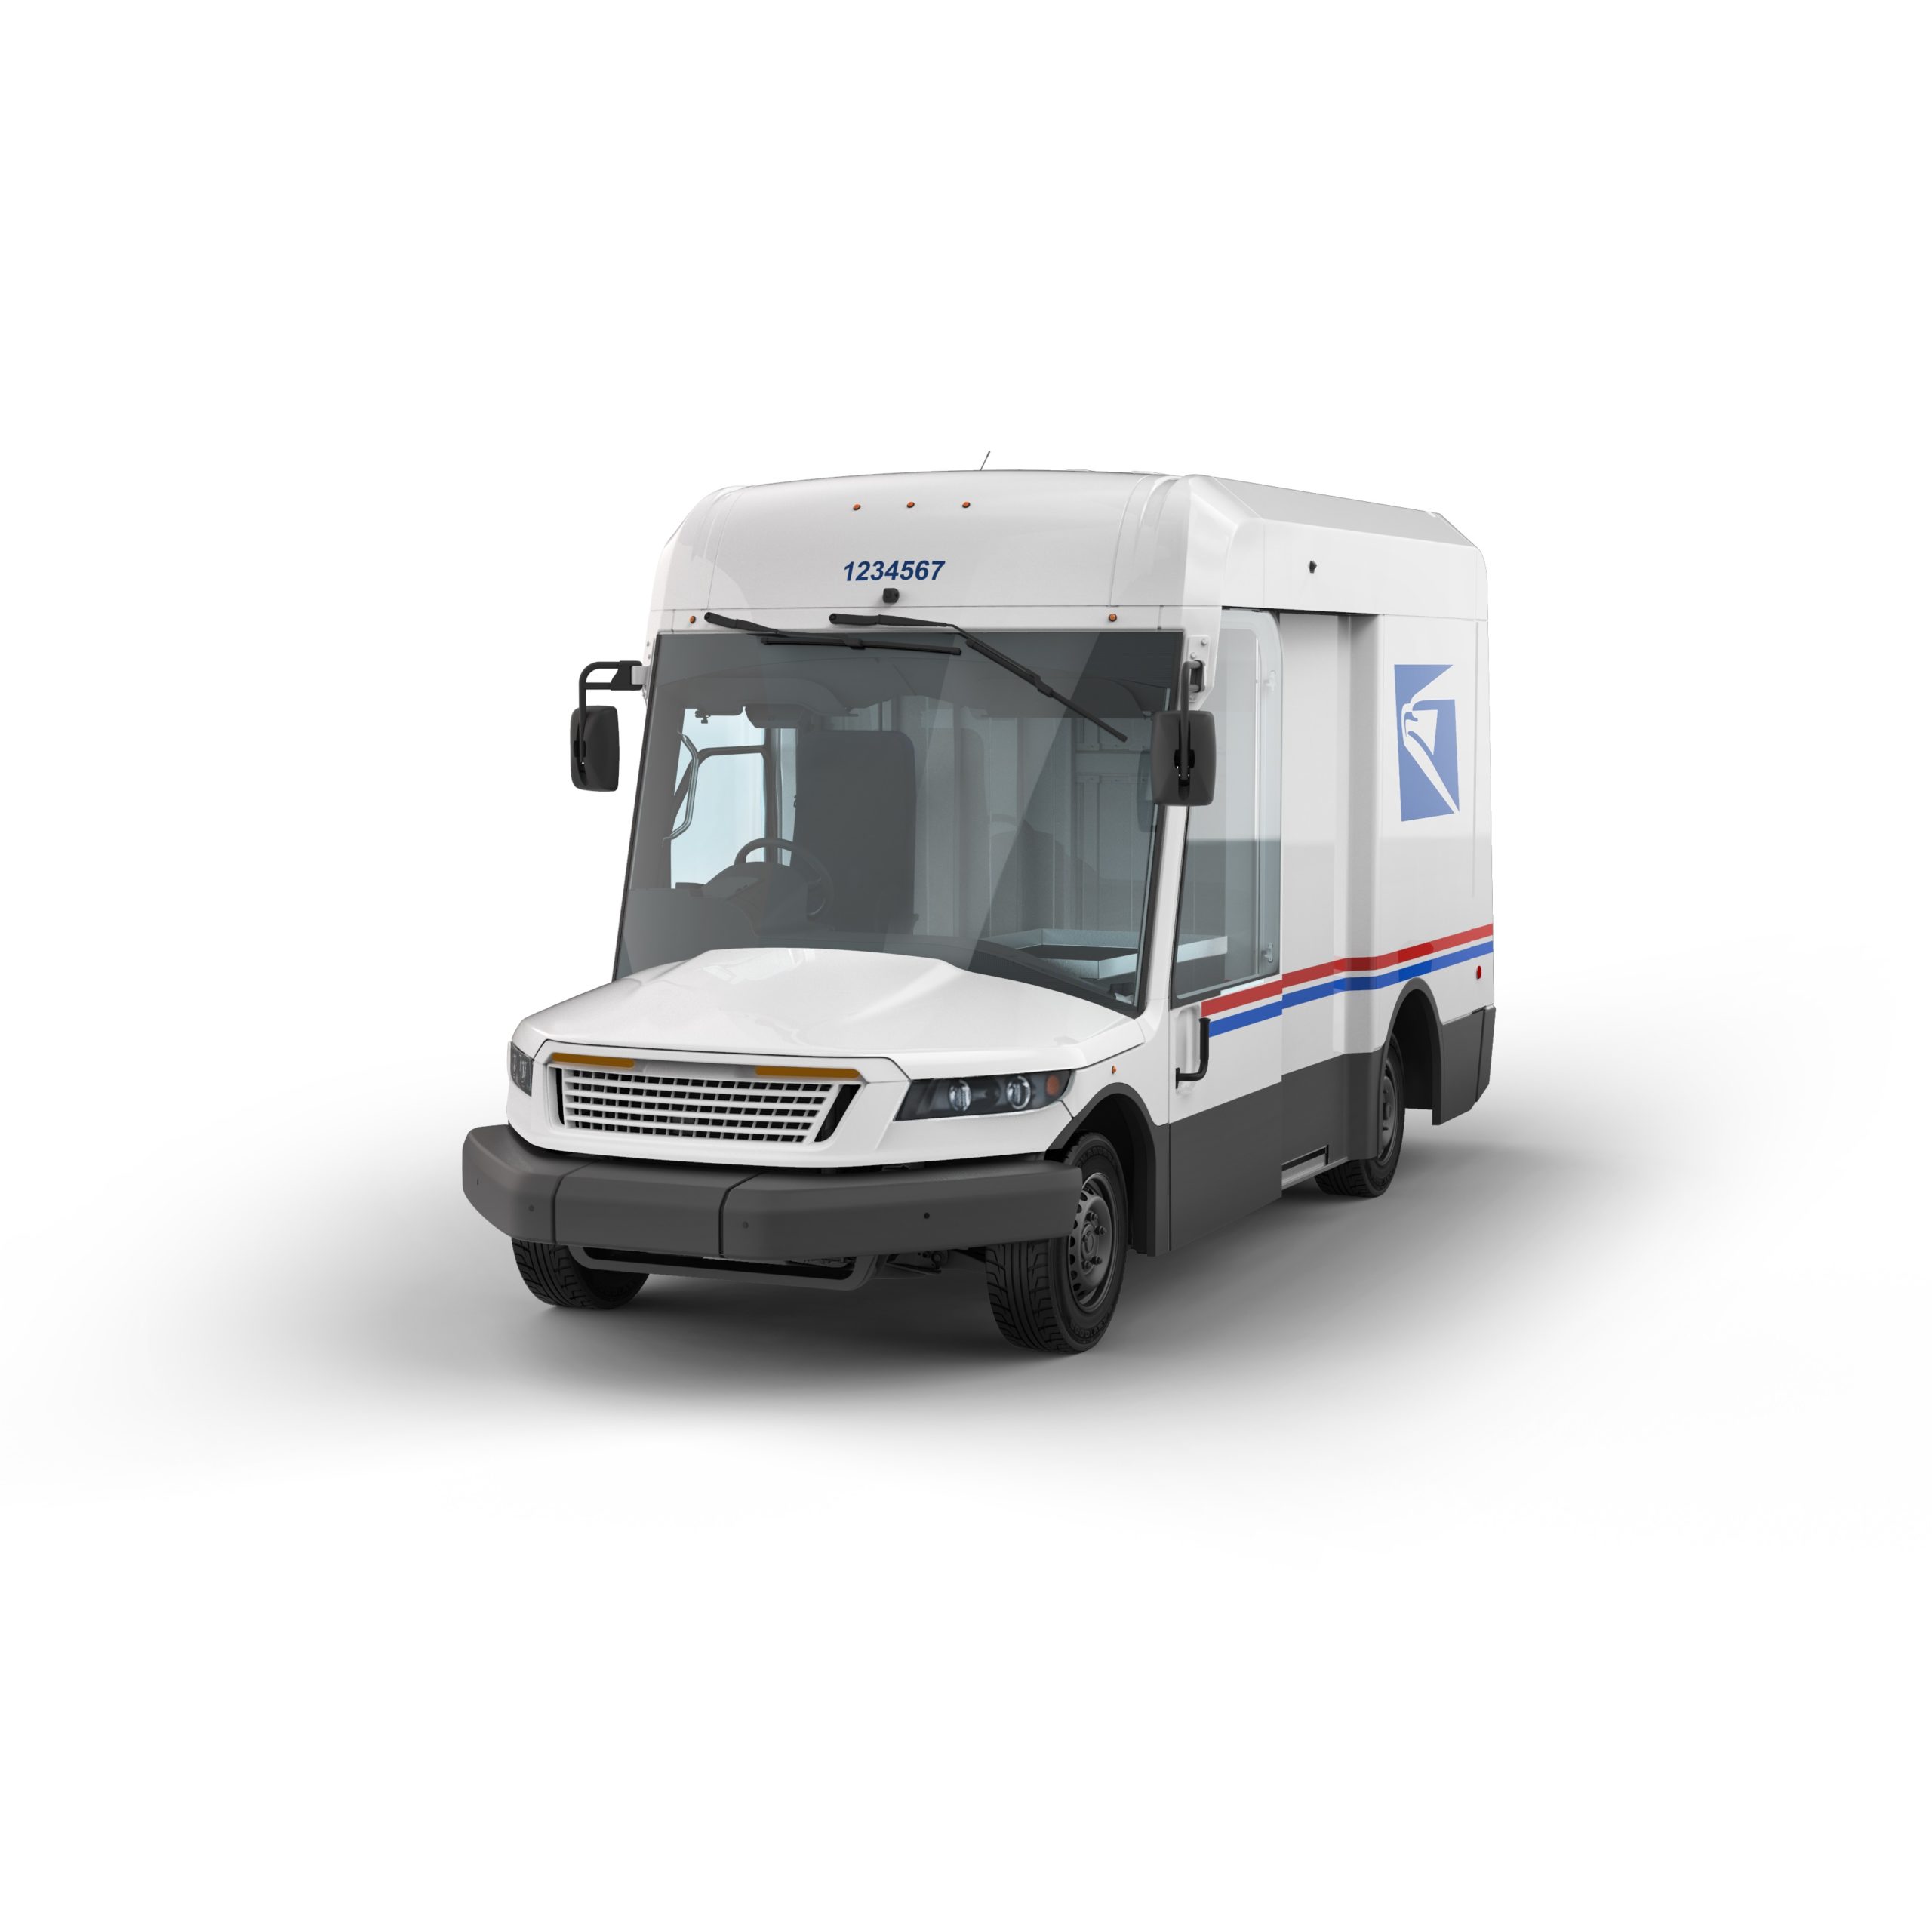 Nextgen USPS mail trucks are only capable of 8.6 mpg, EPA says Take